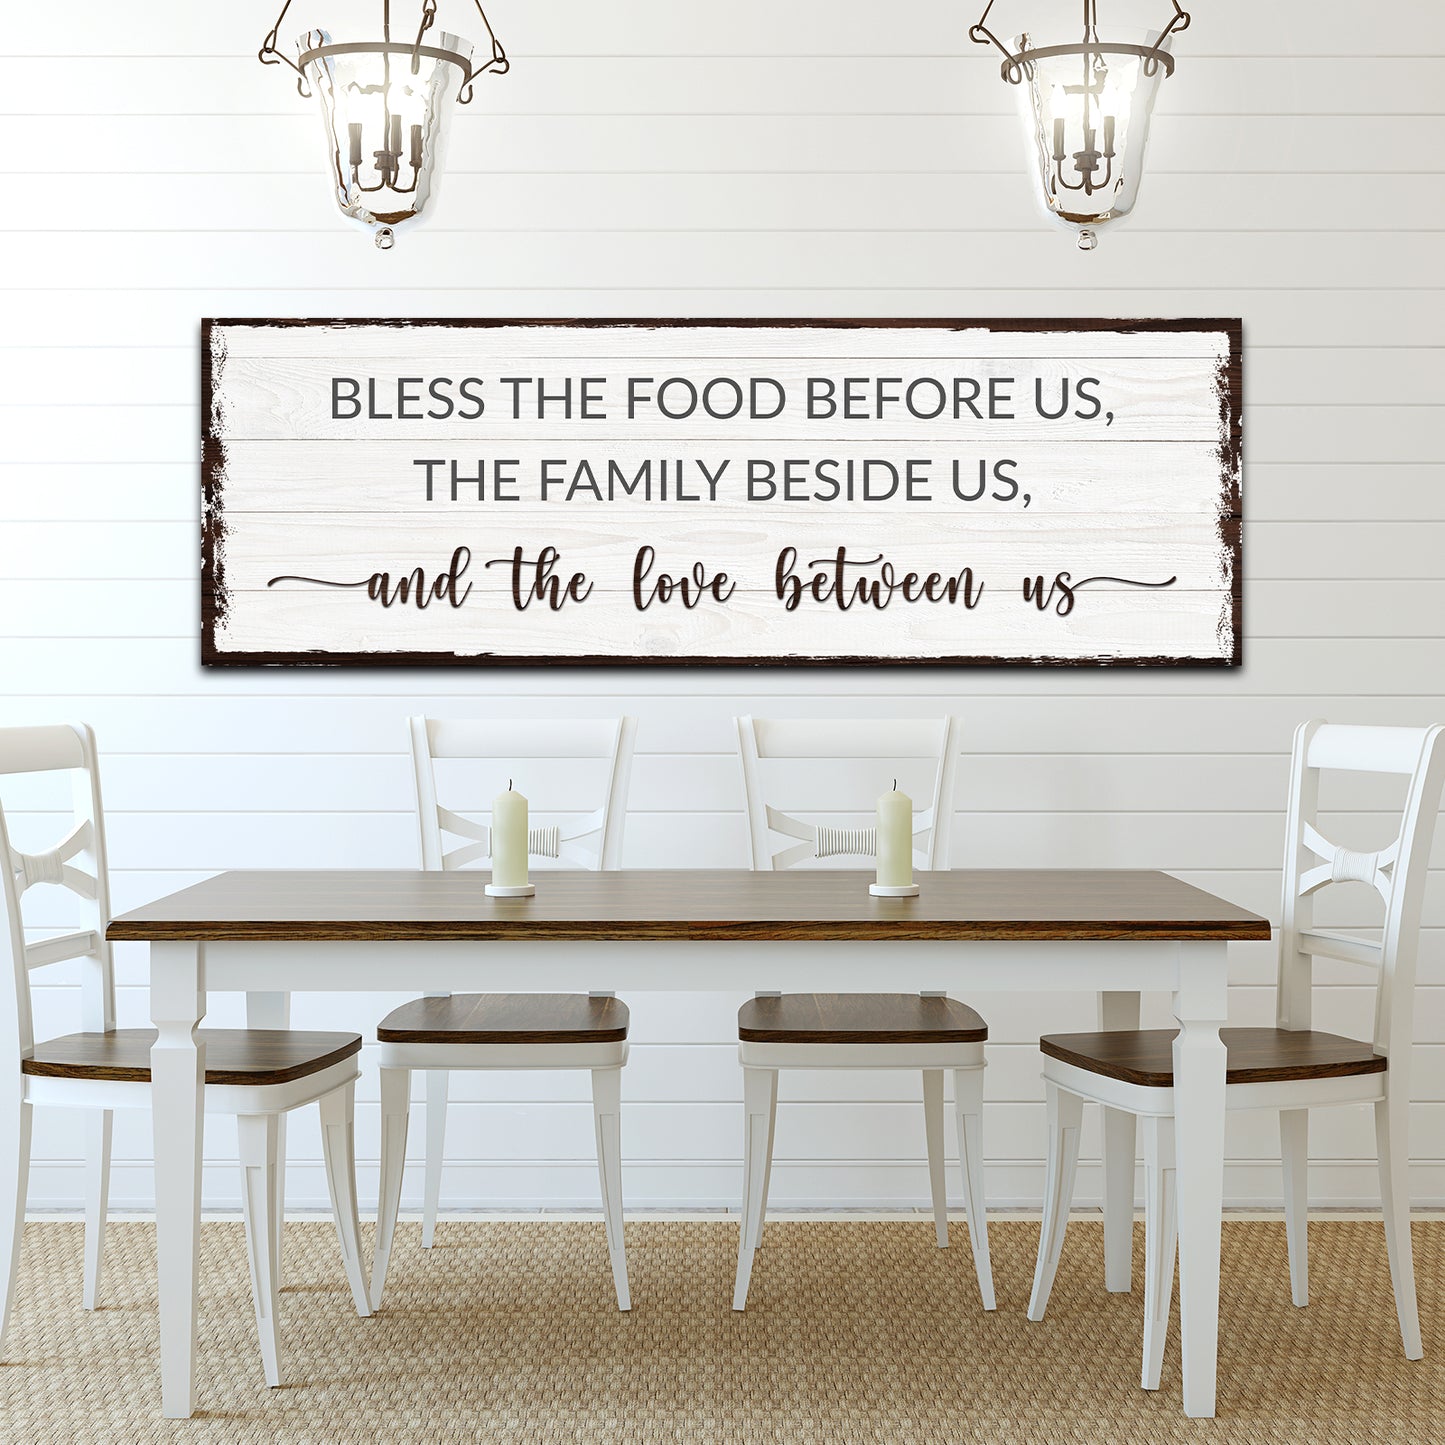 Bless The Food Before Us and the Love Between Us Sign - Image by Tailored Canvases